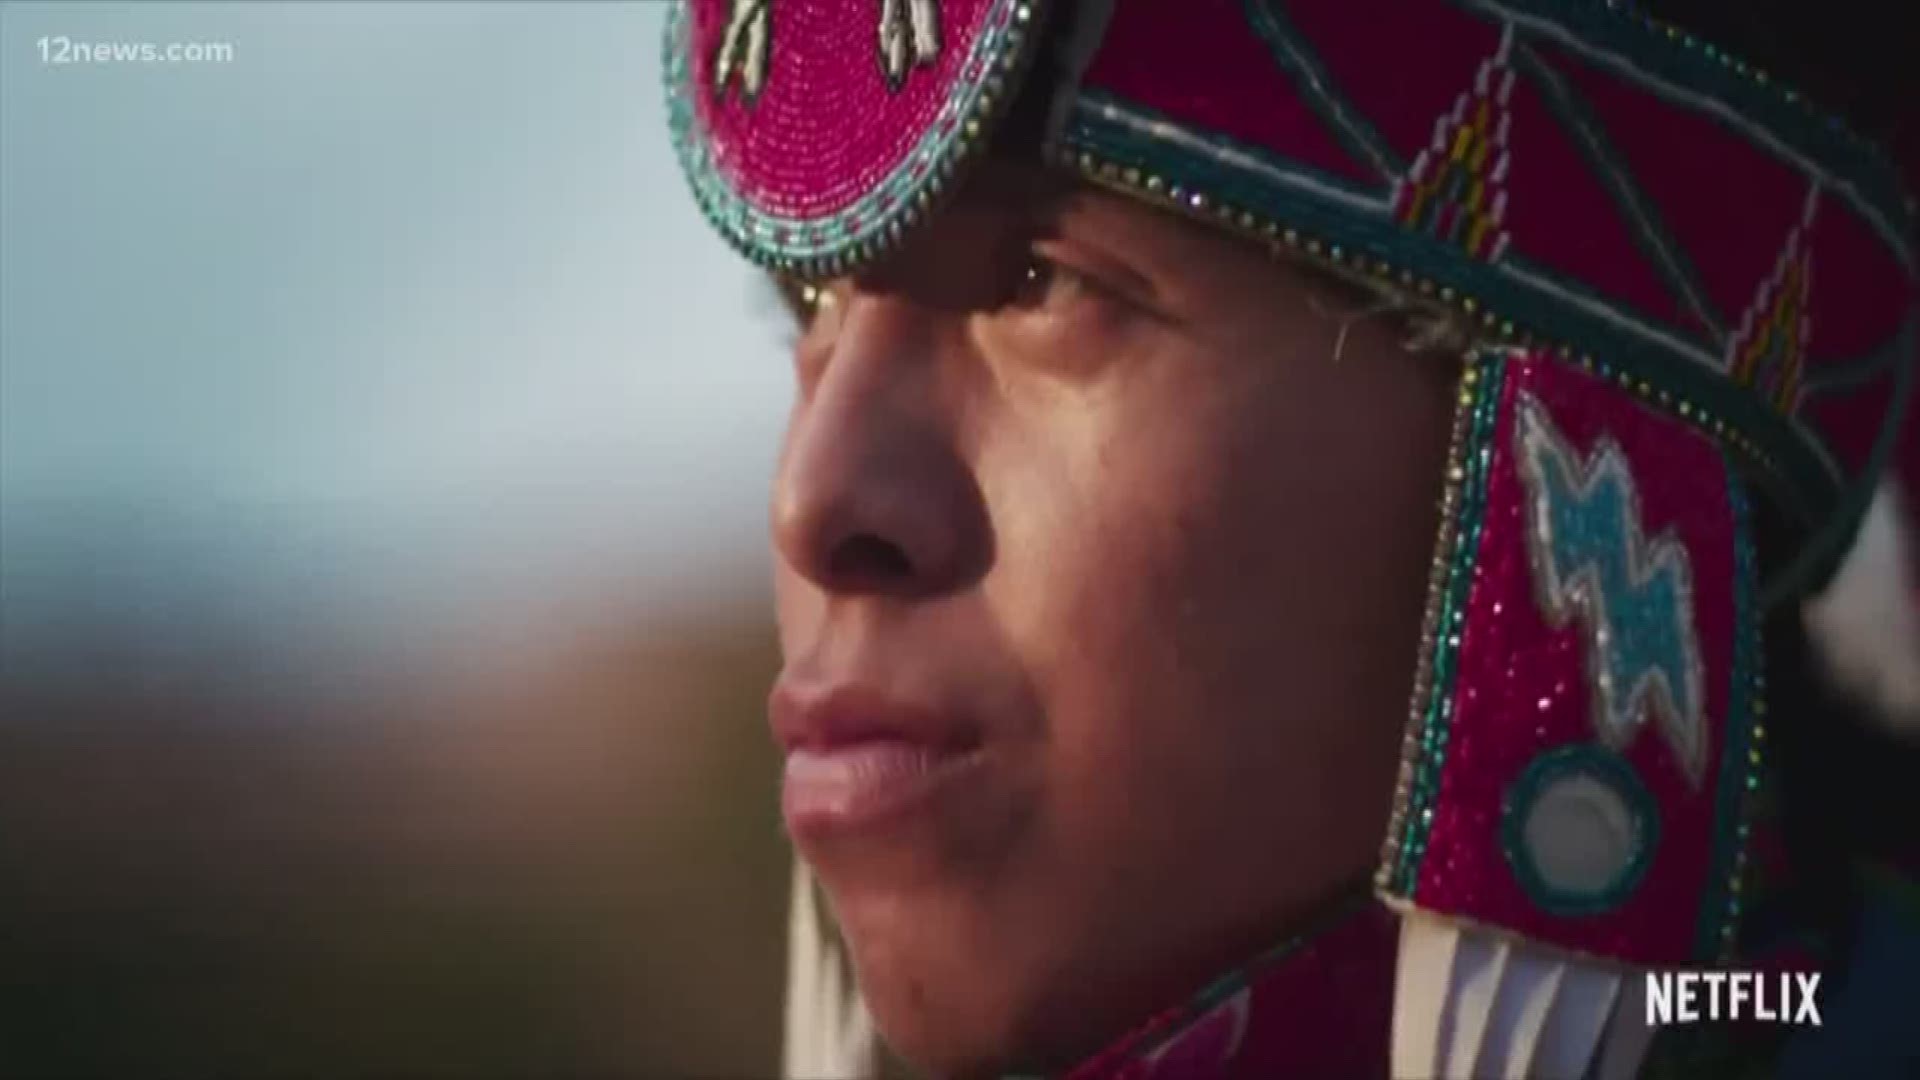 The Netflix docuseries "Basketball or Nothing" highlights a Navajo high school basketball team on its quest for victory. The series is an opportunity to highlight Native American storytellers and Native American communities, particularly here in Arizona.